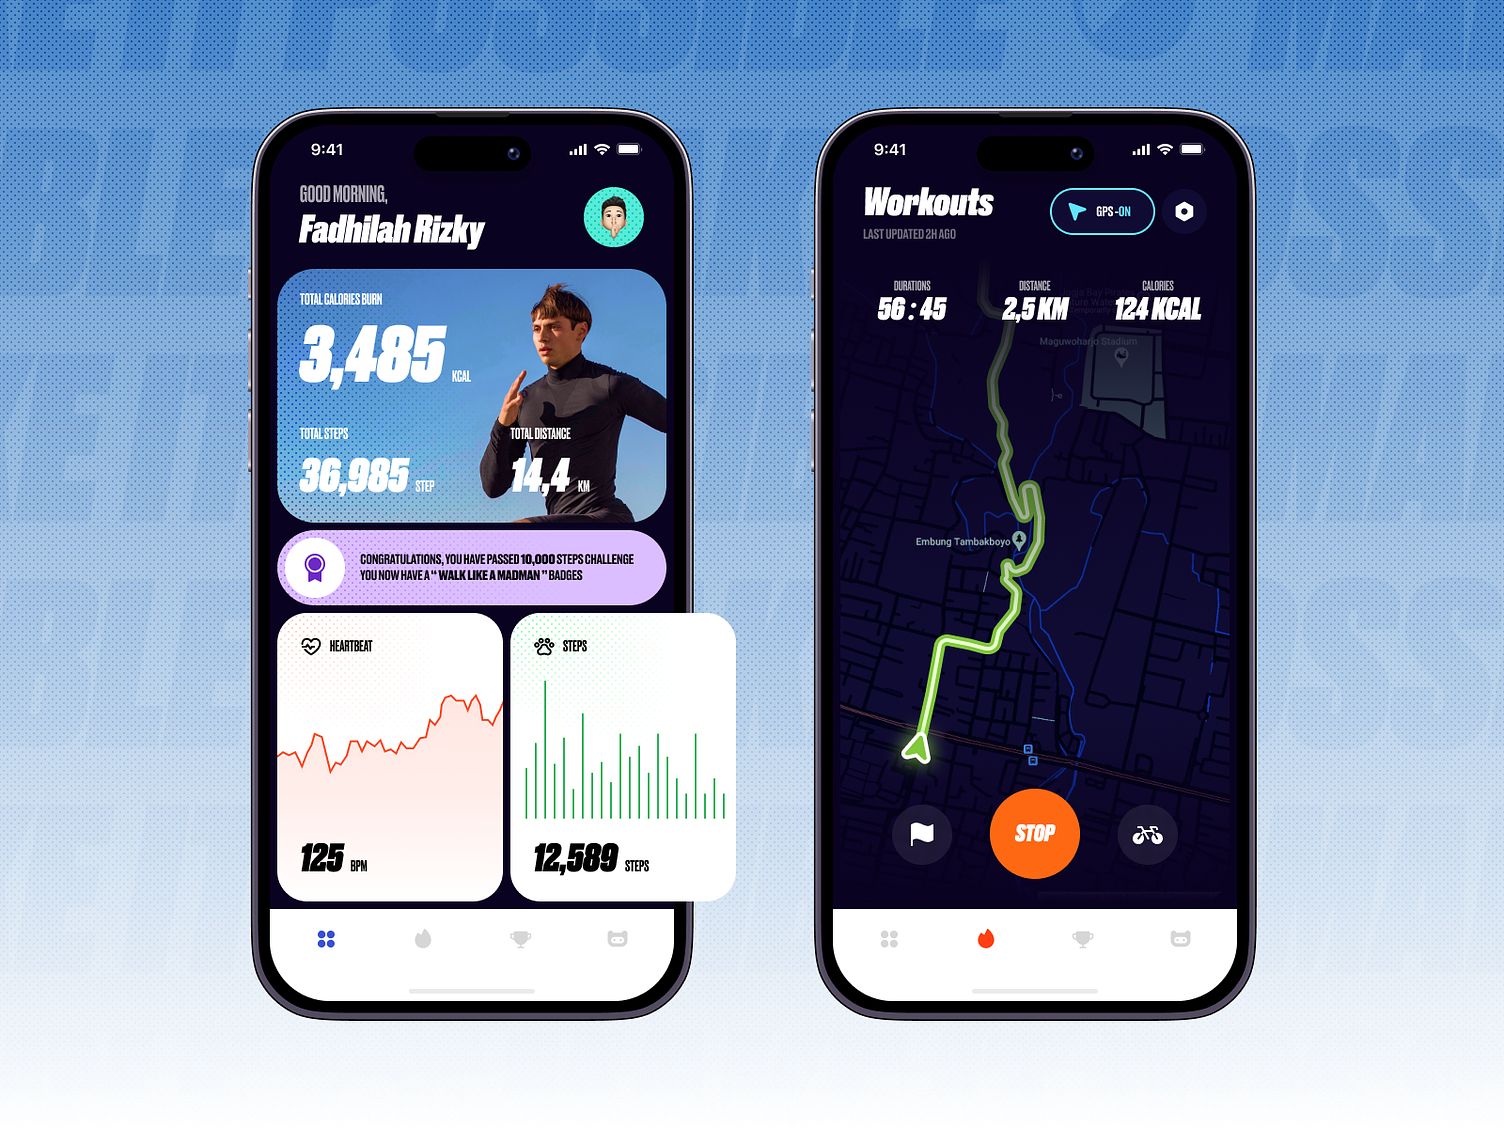 Fitness tracking apps enable users to monitor their physical activity on their mobile devices